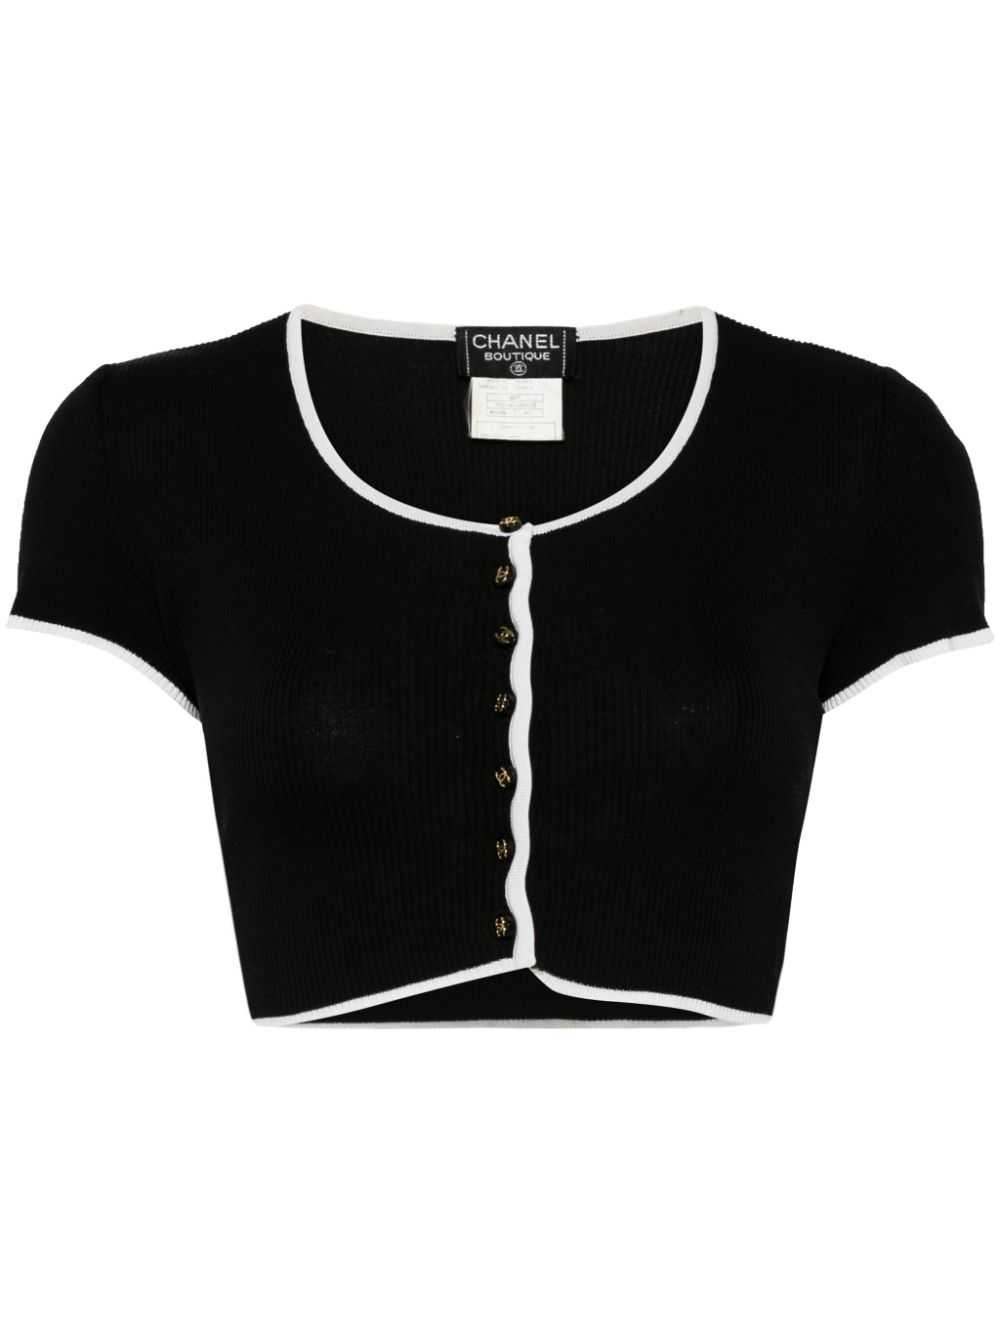 CHANEL Pre-Owned 1995 CC cropped T-shirt - Black - image 1